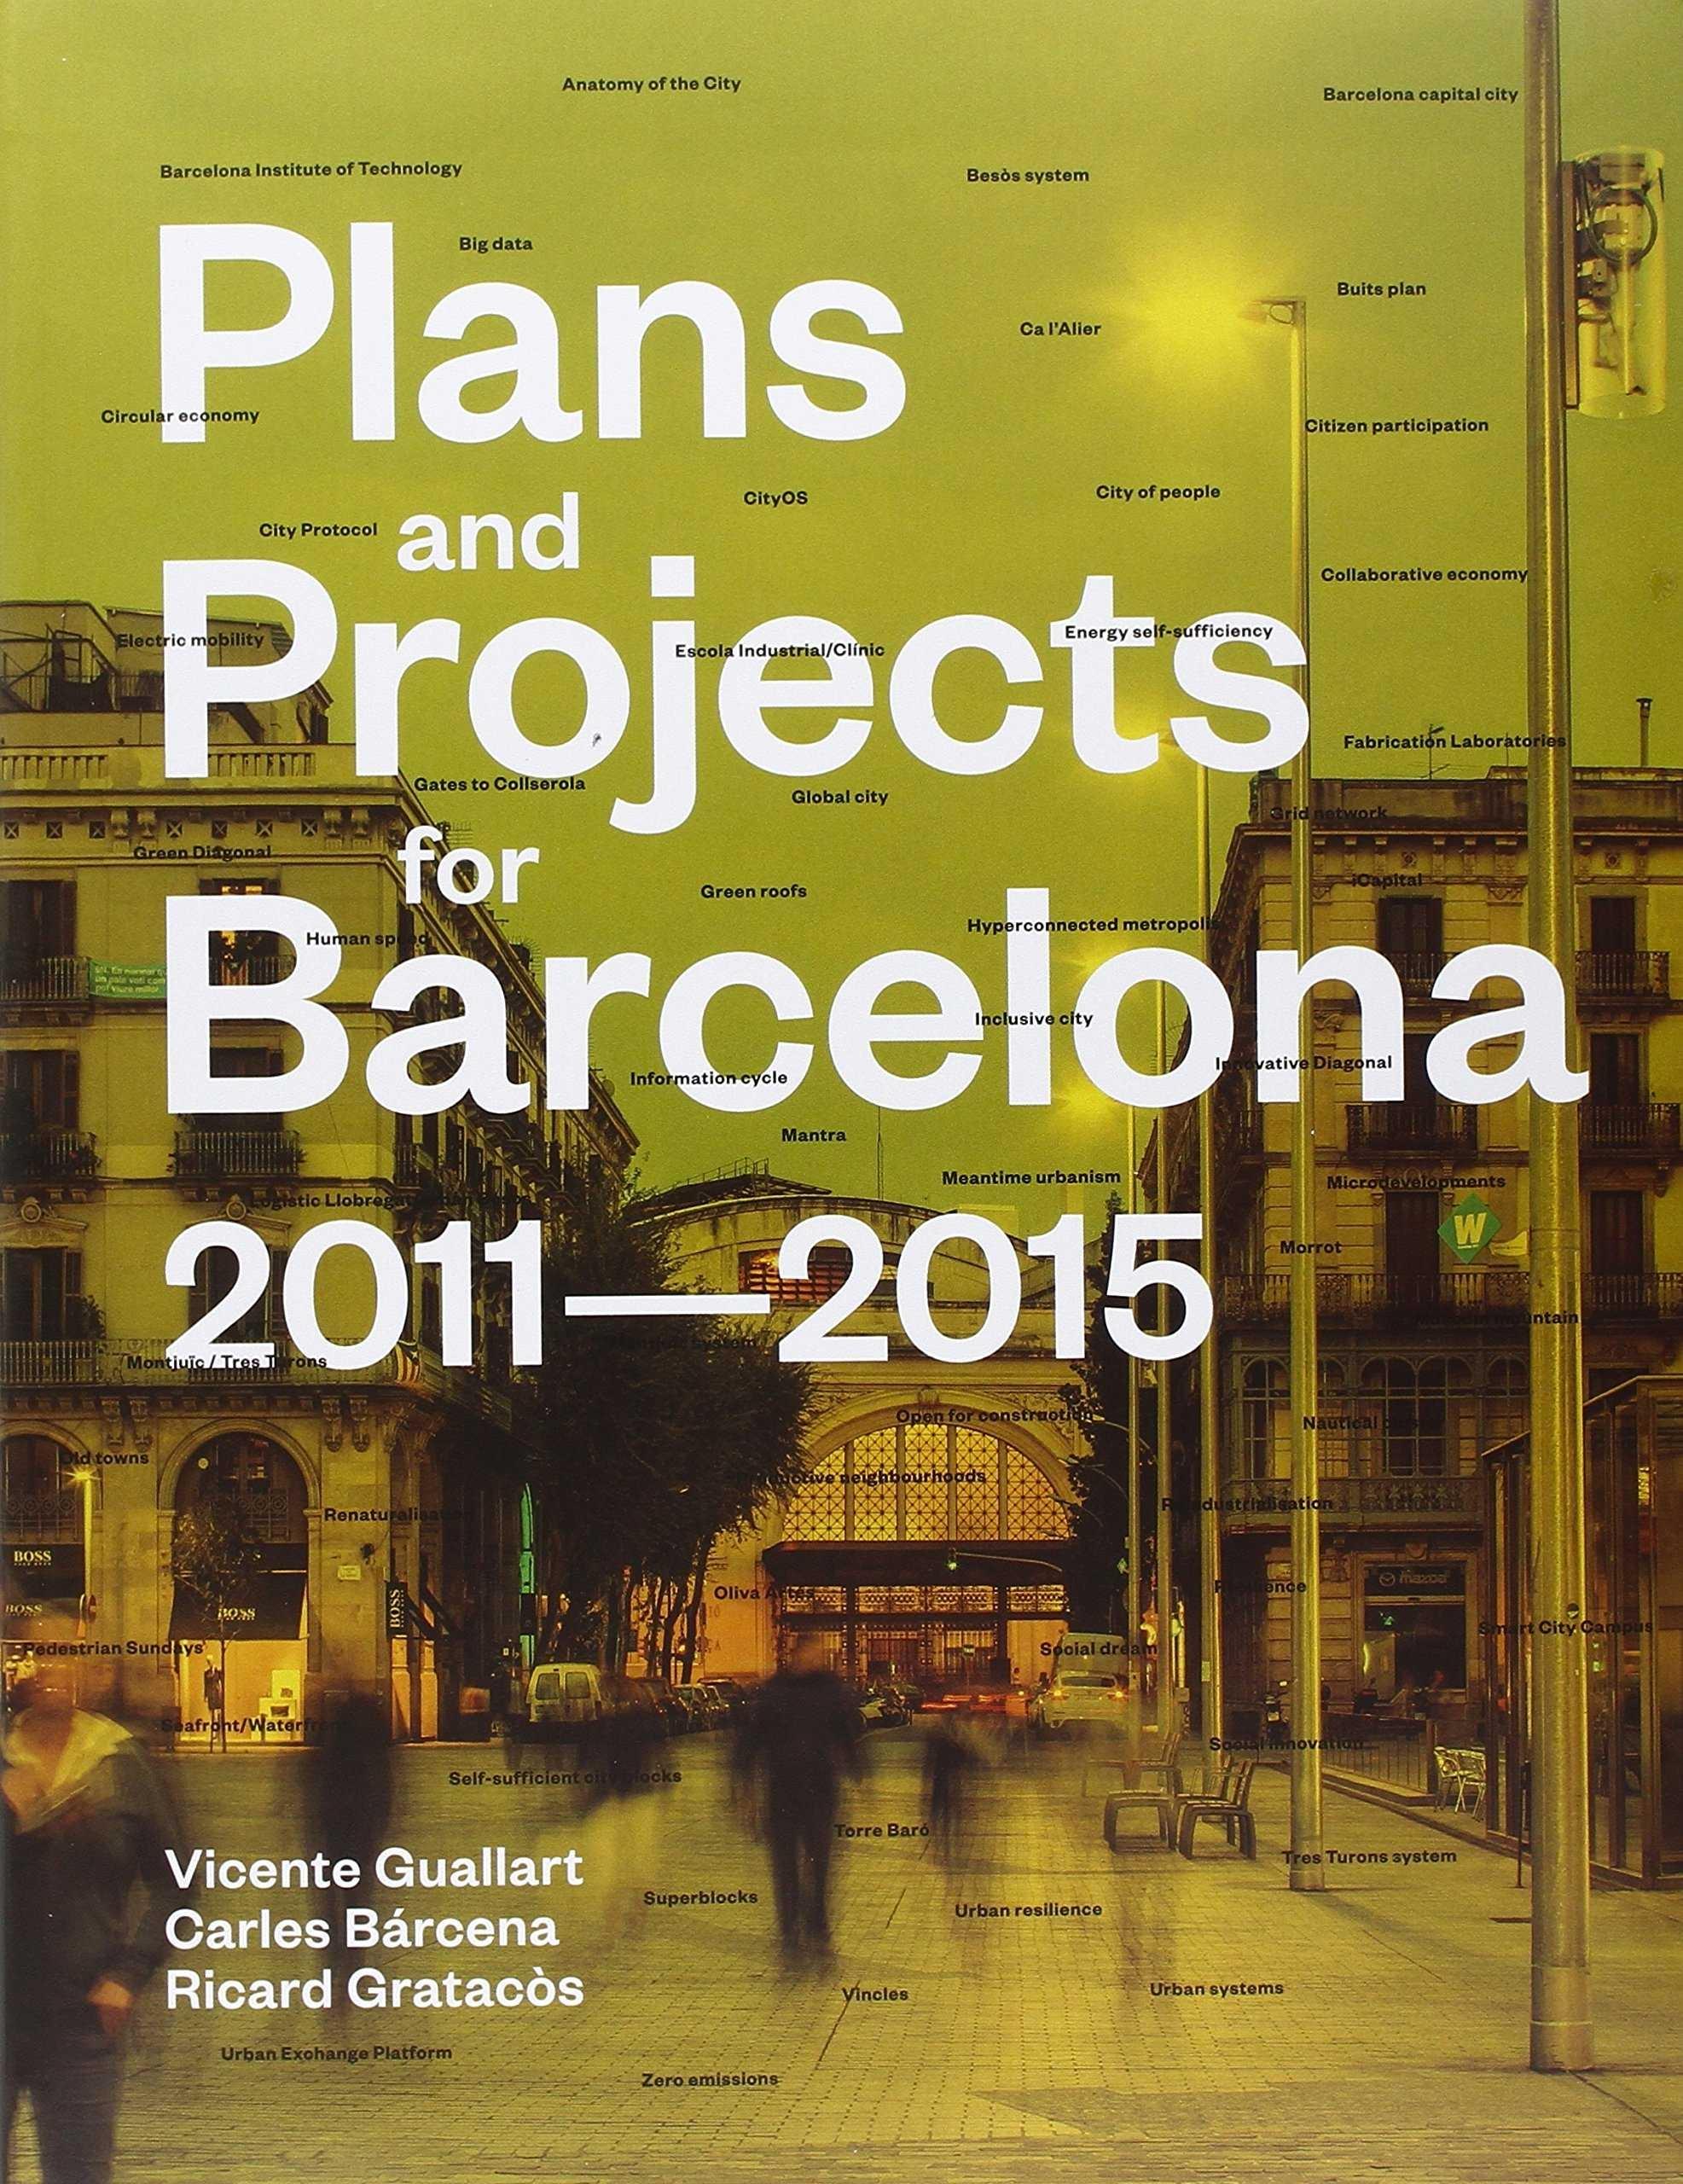 PLANS AND PROJECTS FOR BARCELONA 2011-2015. 